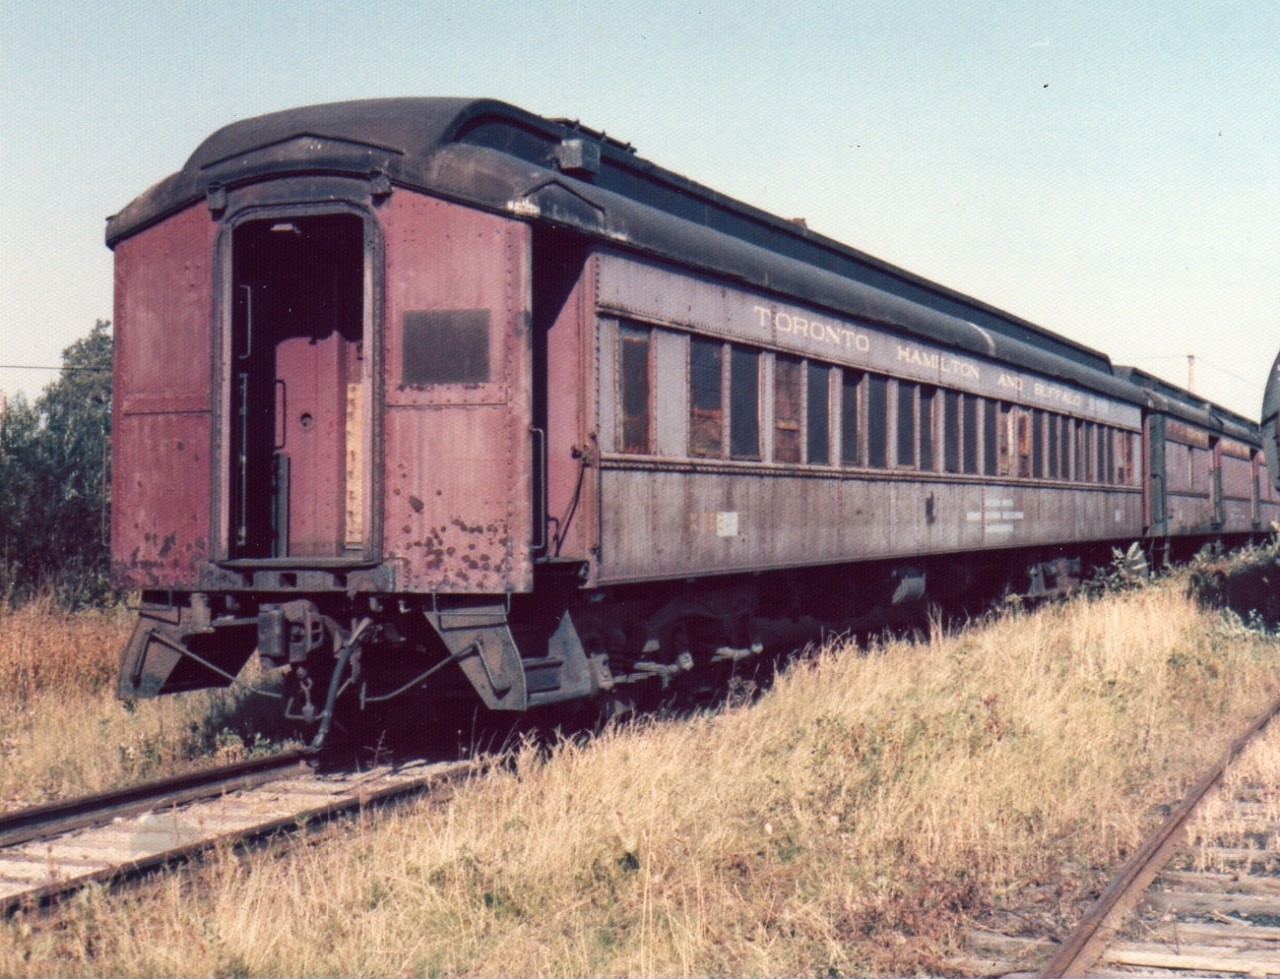 While it may not look like it, this bunk car was still in service and was a home-on-the-road for members of the TH&B wrecking crew.  This coach along with several others were stored 'ready to go' at TH&B's Aberdeen Avenue yard in this mid-1974 photo.